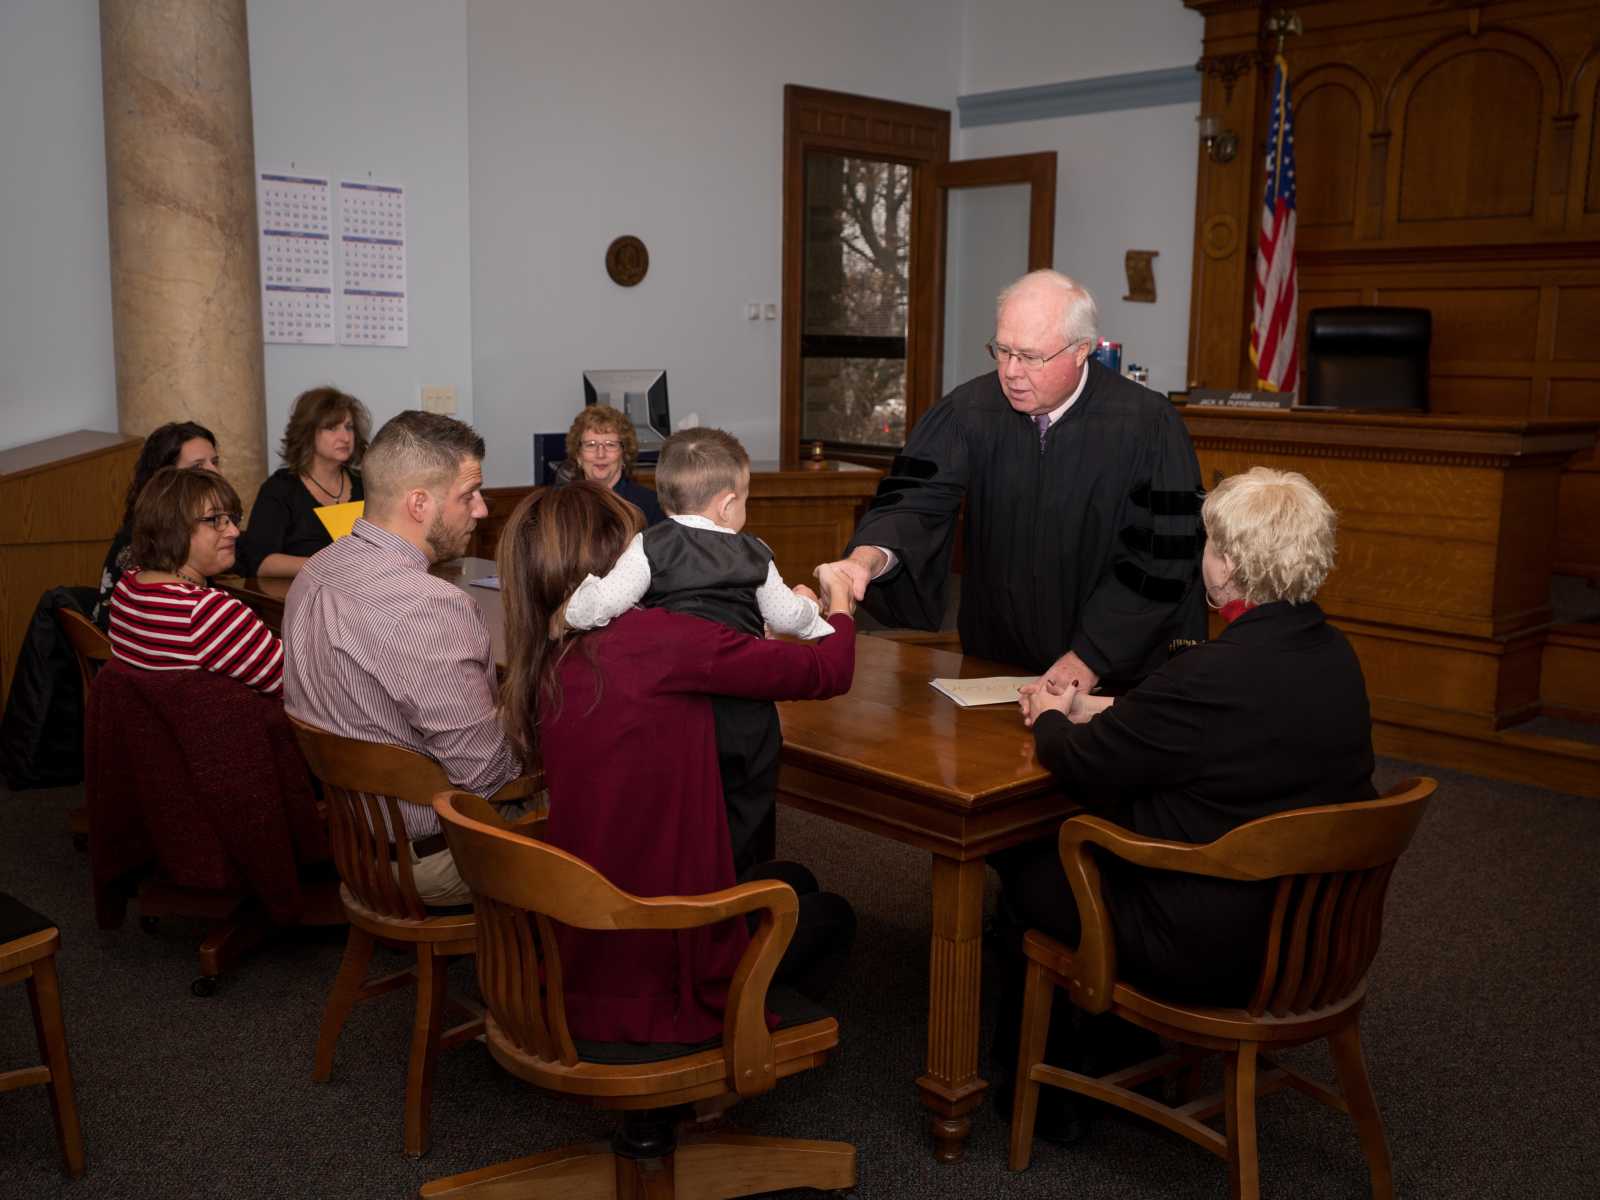 judge shakes hand of adoptive child who is at table with his parents and others